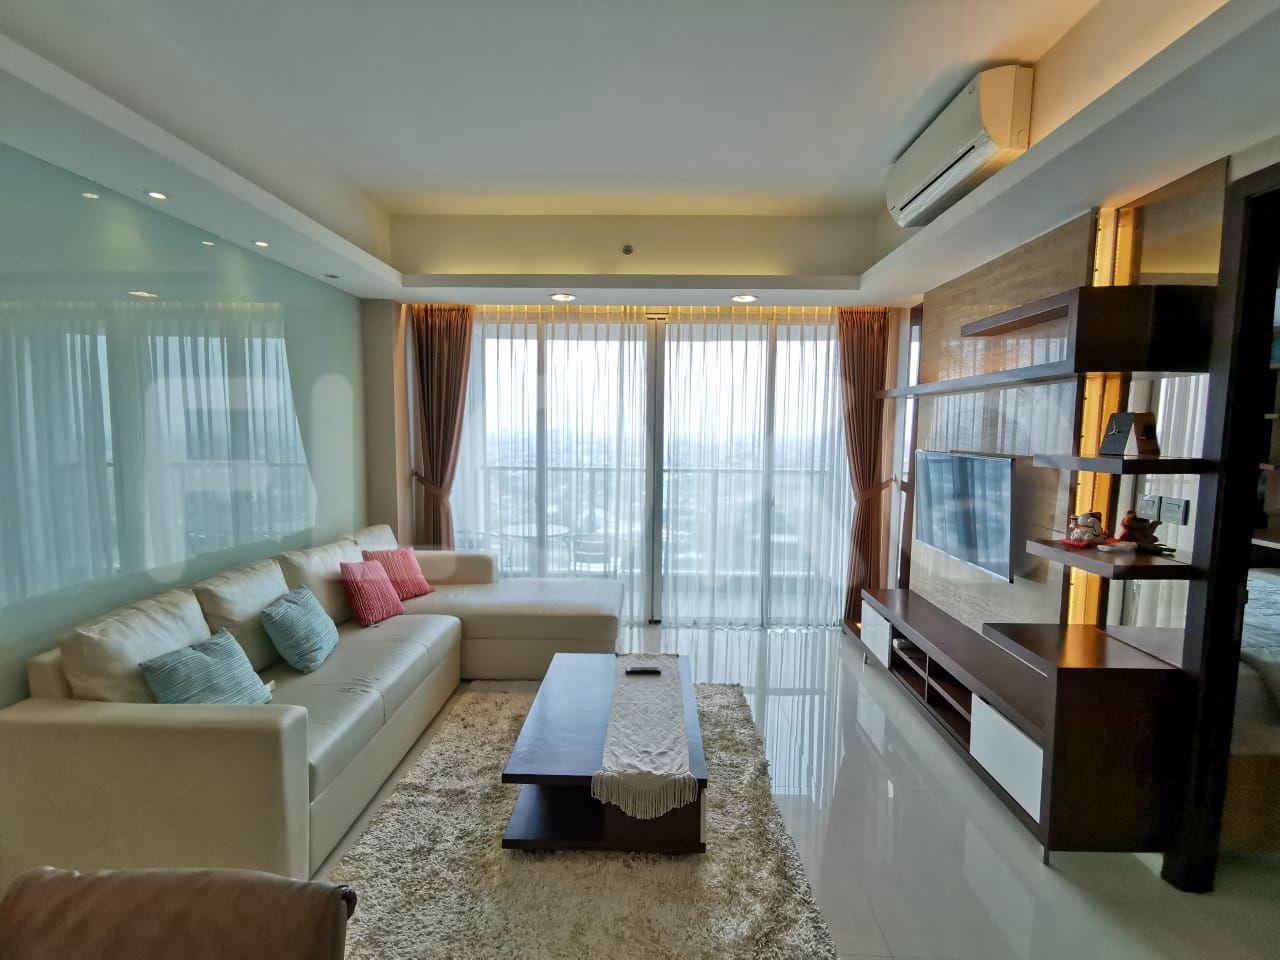 2 Bedroom on 26th Floor fkea2f for Rent in Kemang Village Residence